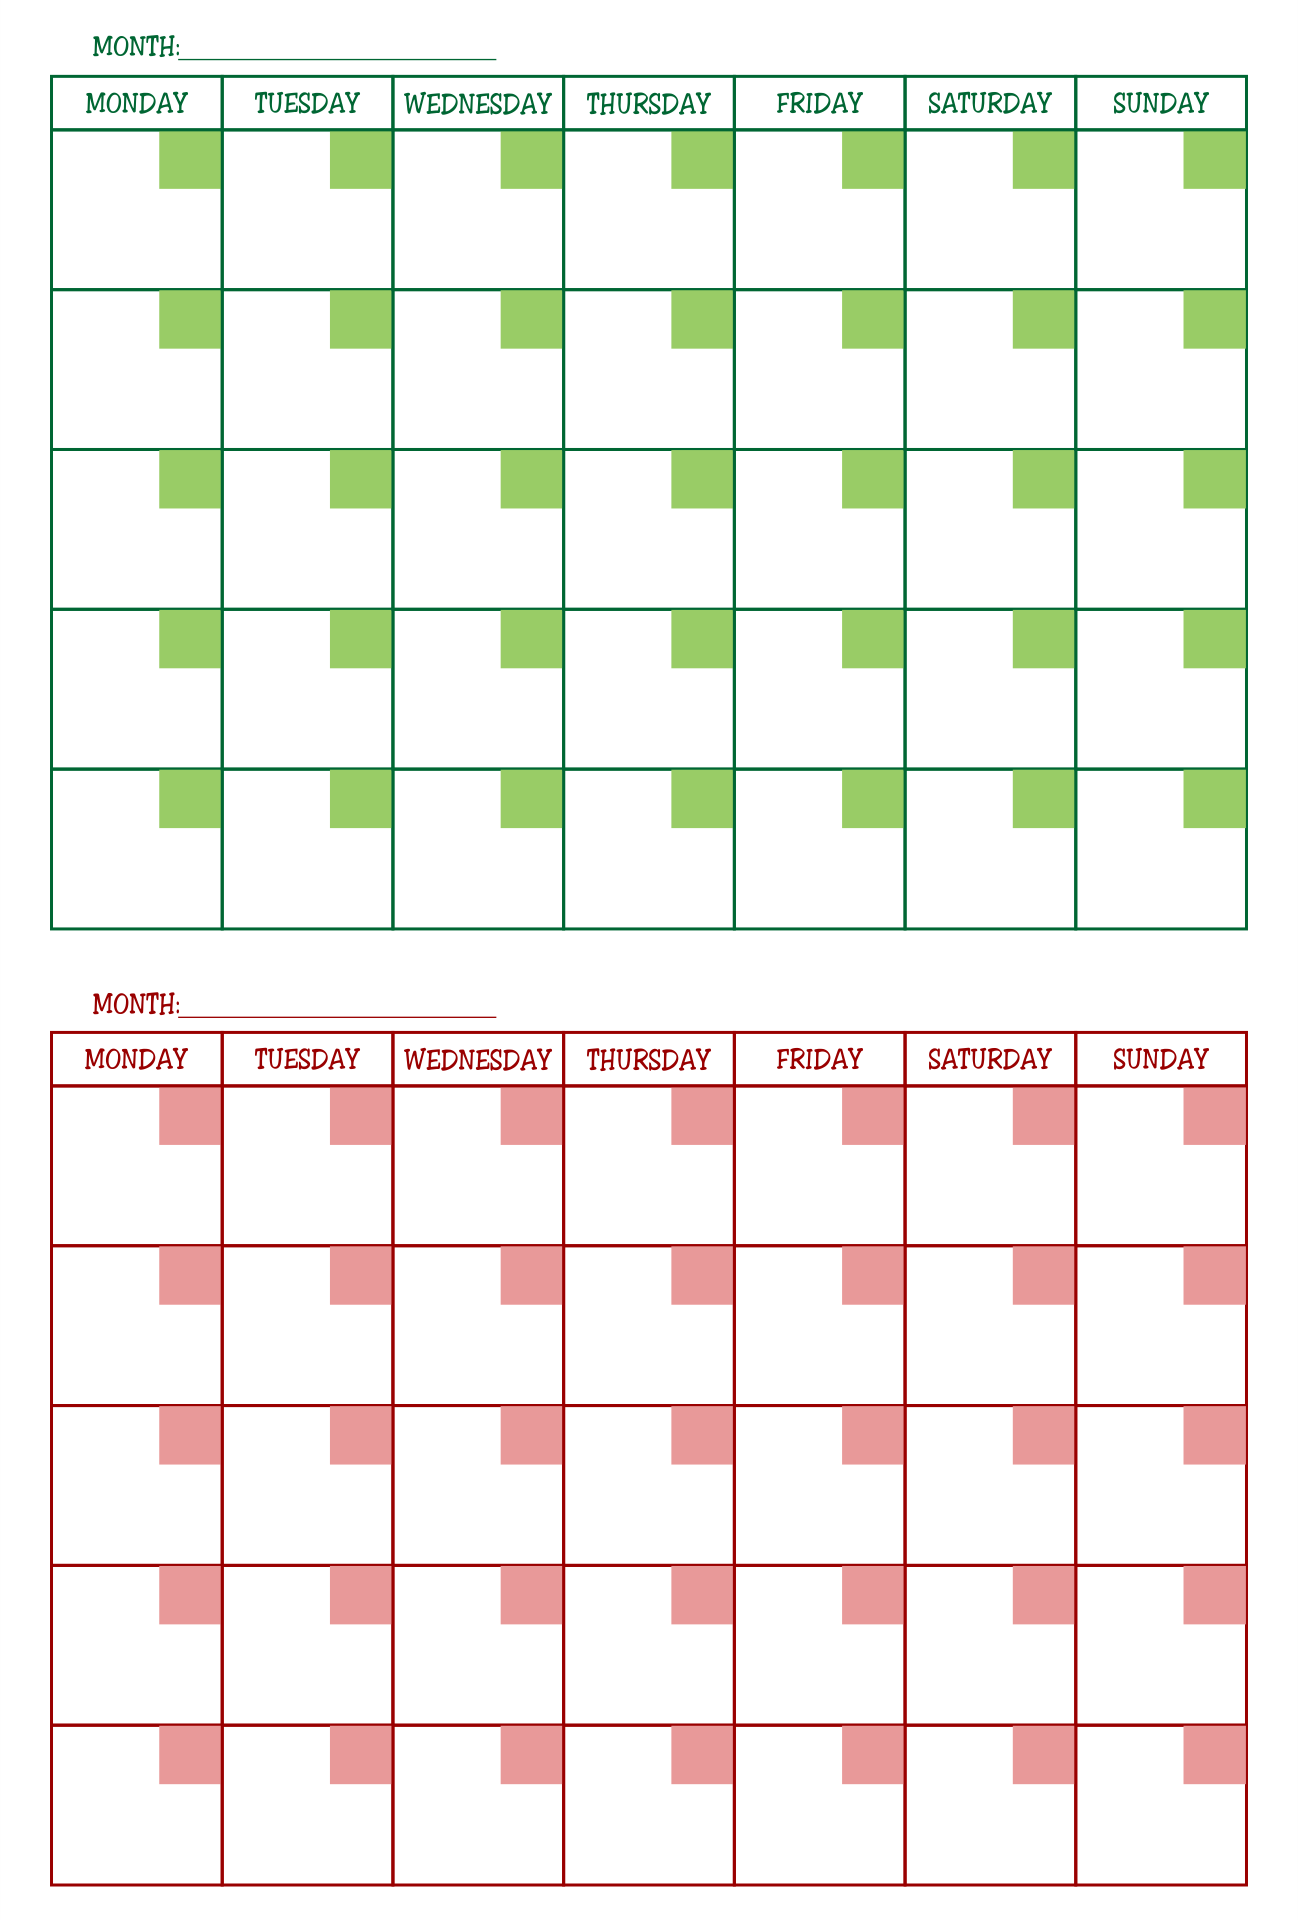 5-best-images-of-two-month-calendar-printable-two-page-monthly